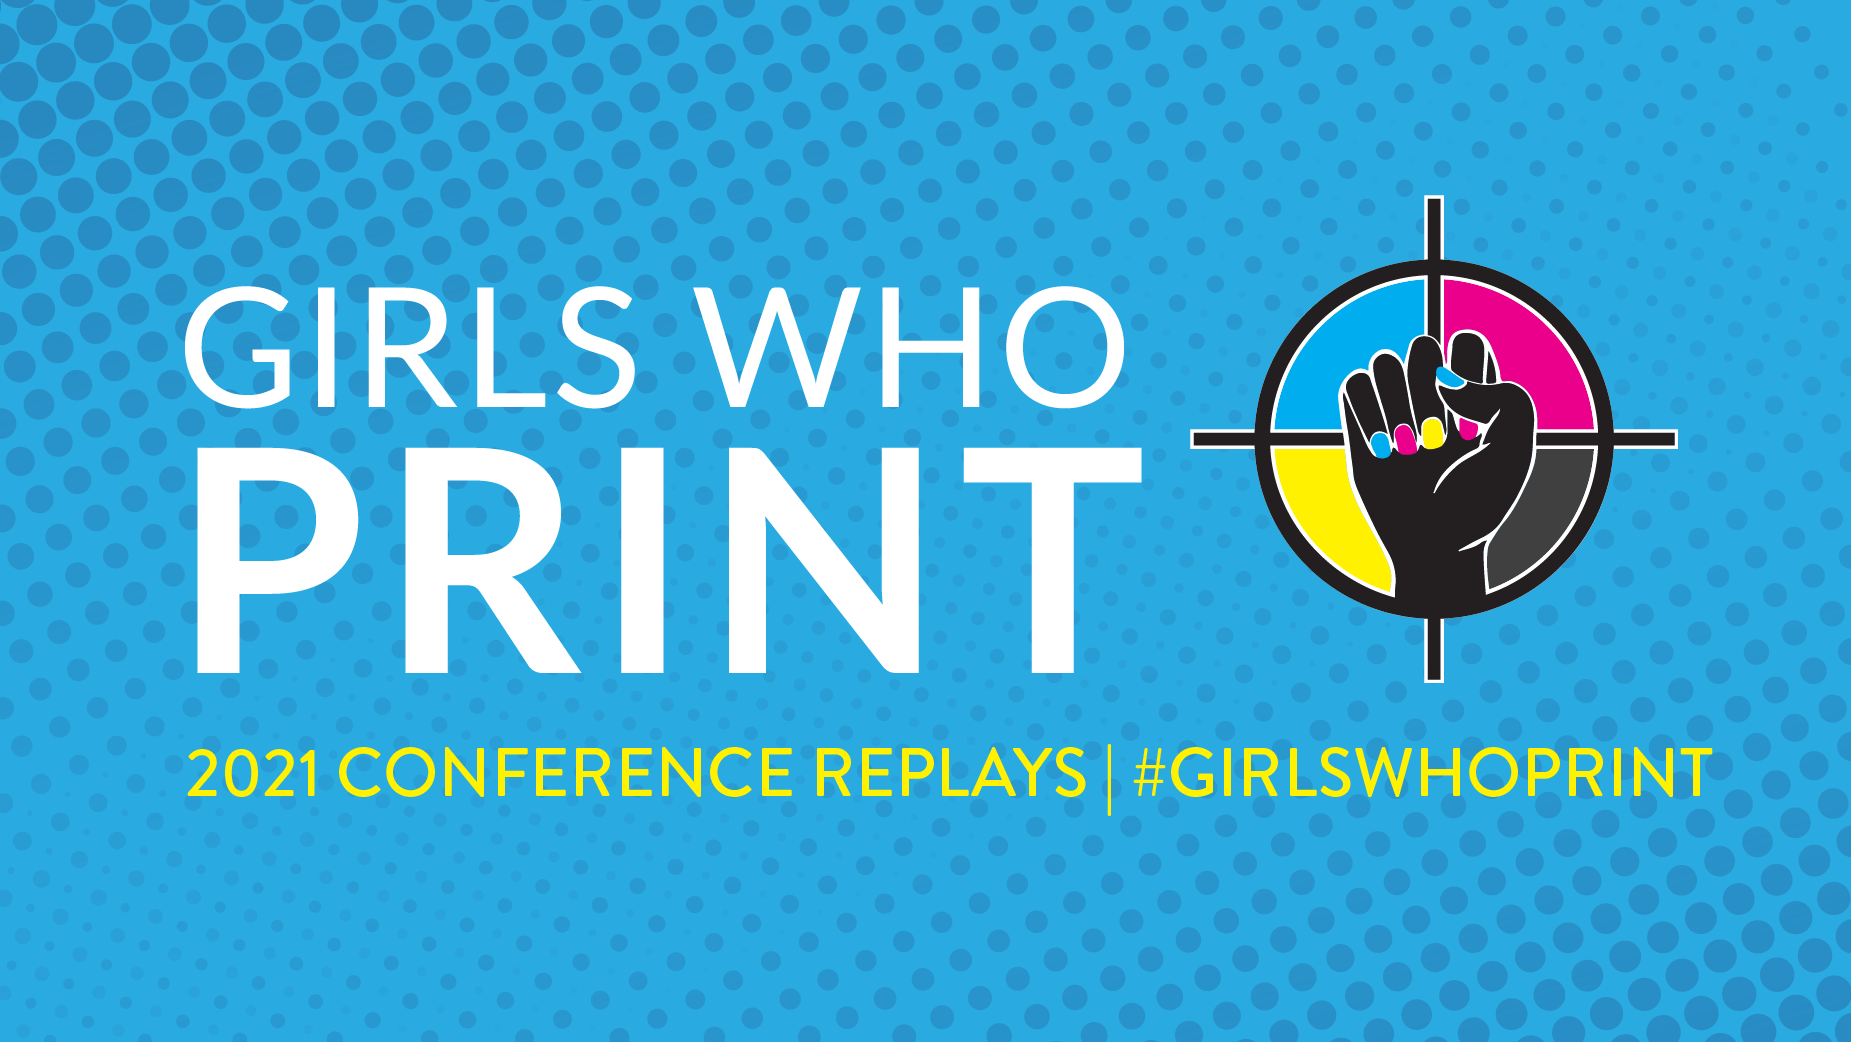 Girls Who Print Day 2021 conference replays